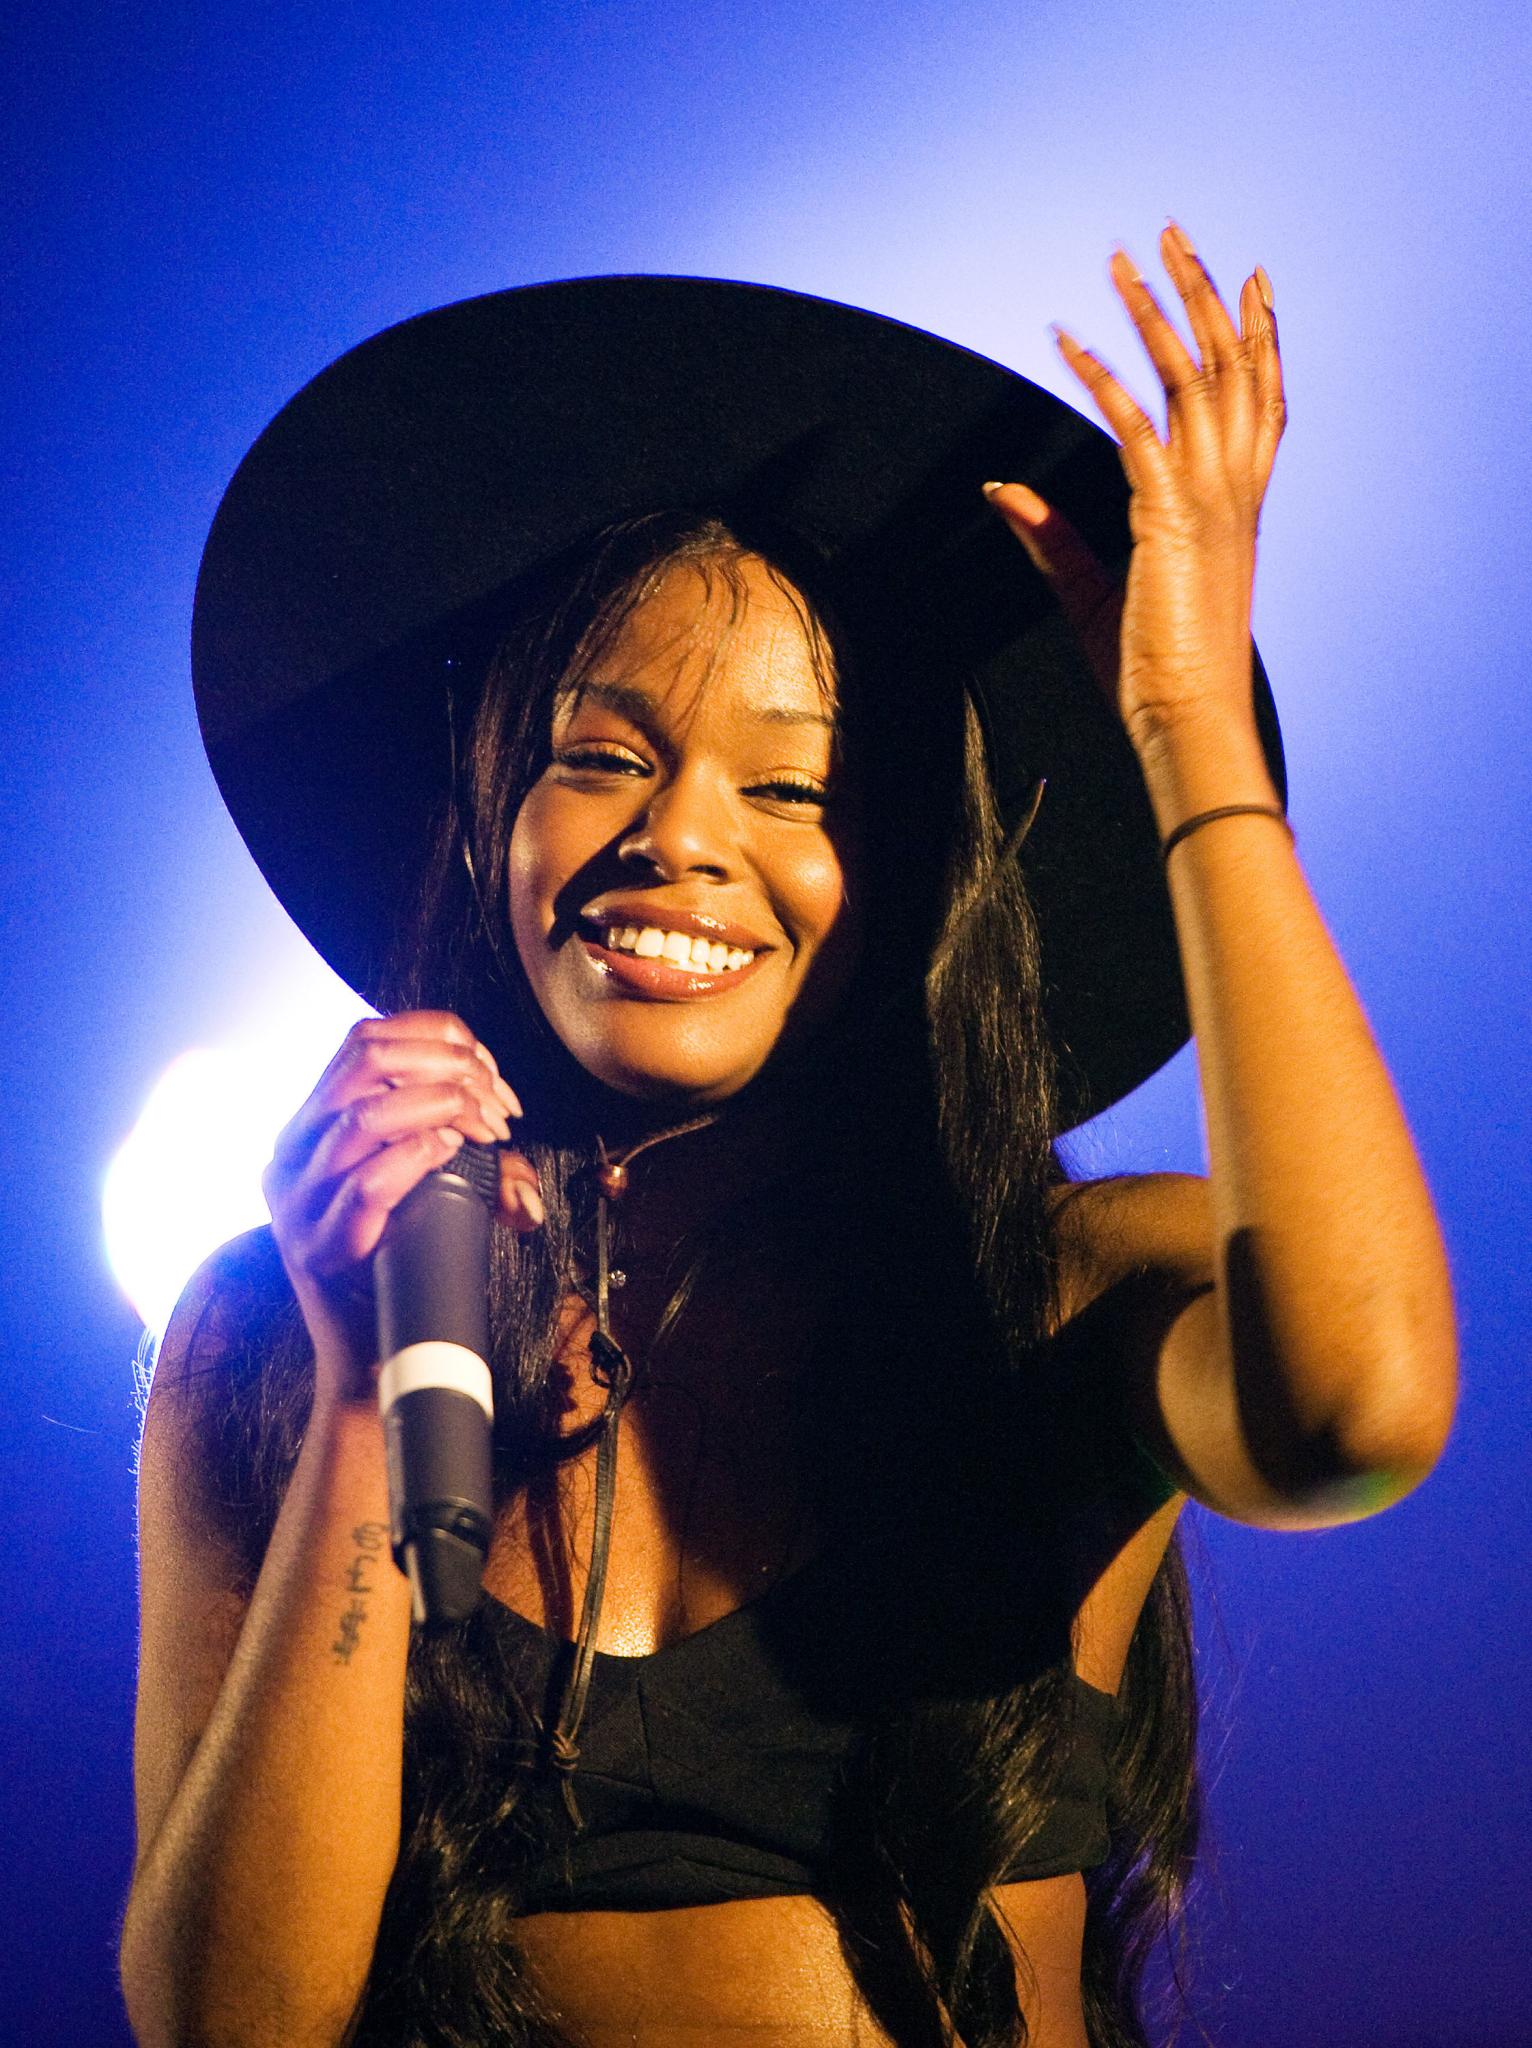 Azealia Banks Defends Trump And Attacks Rihanna: 'You Really Need to Shut Up and Sit Down'